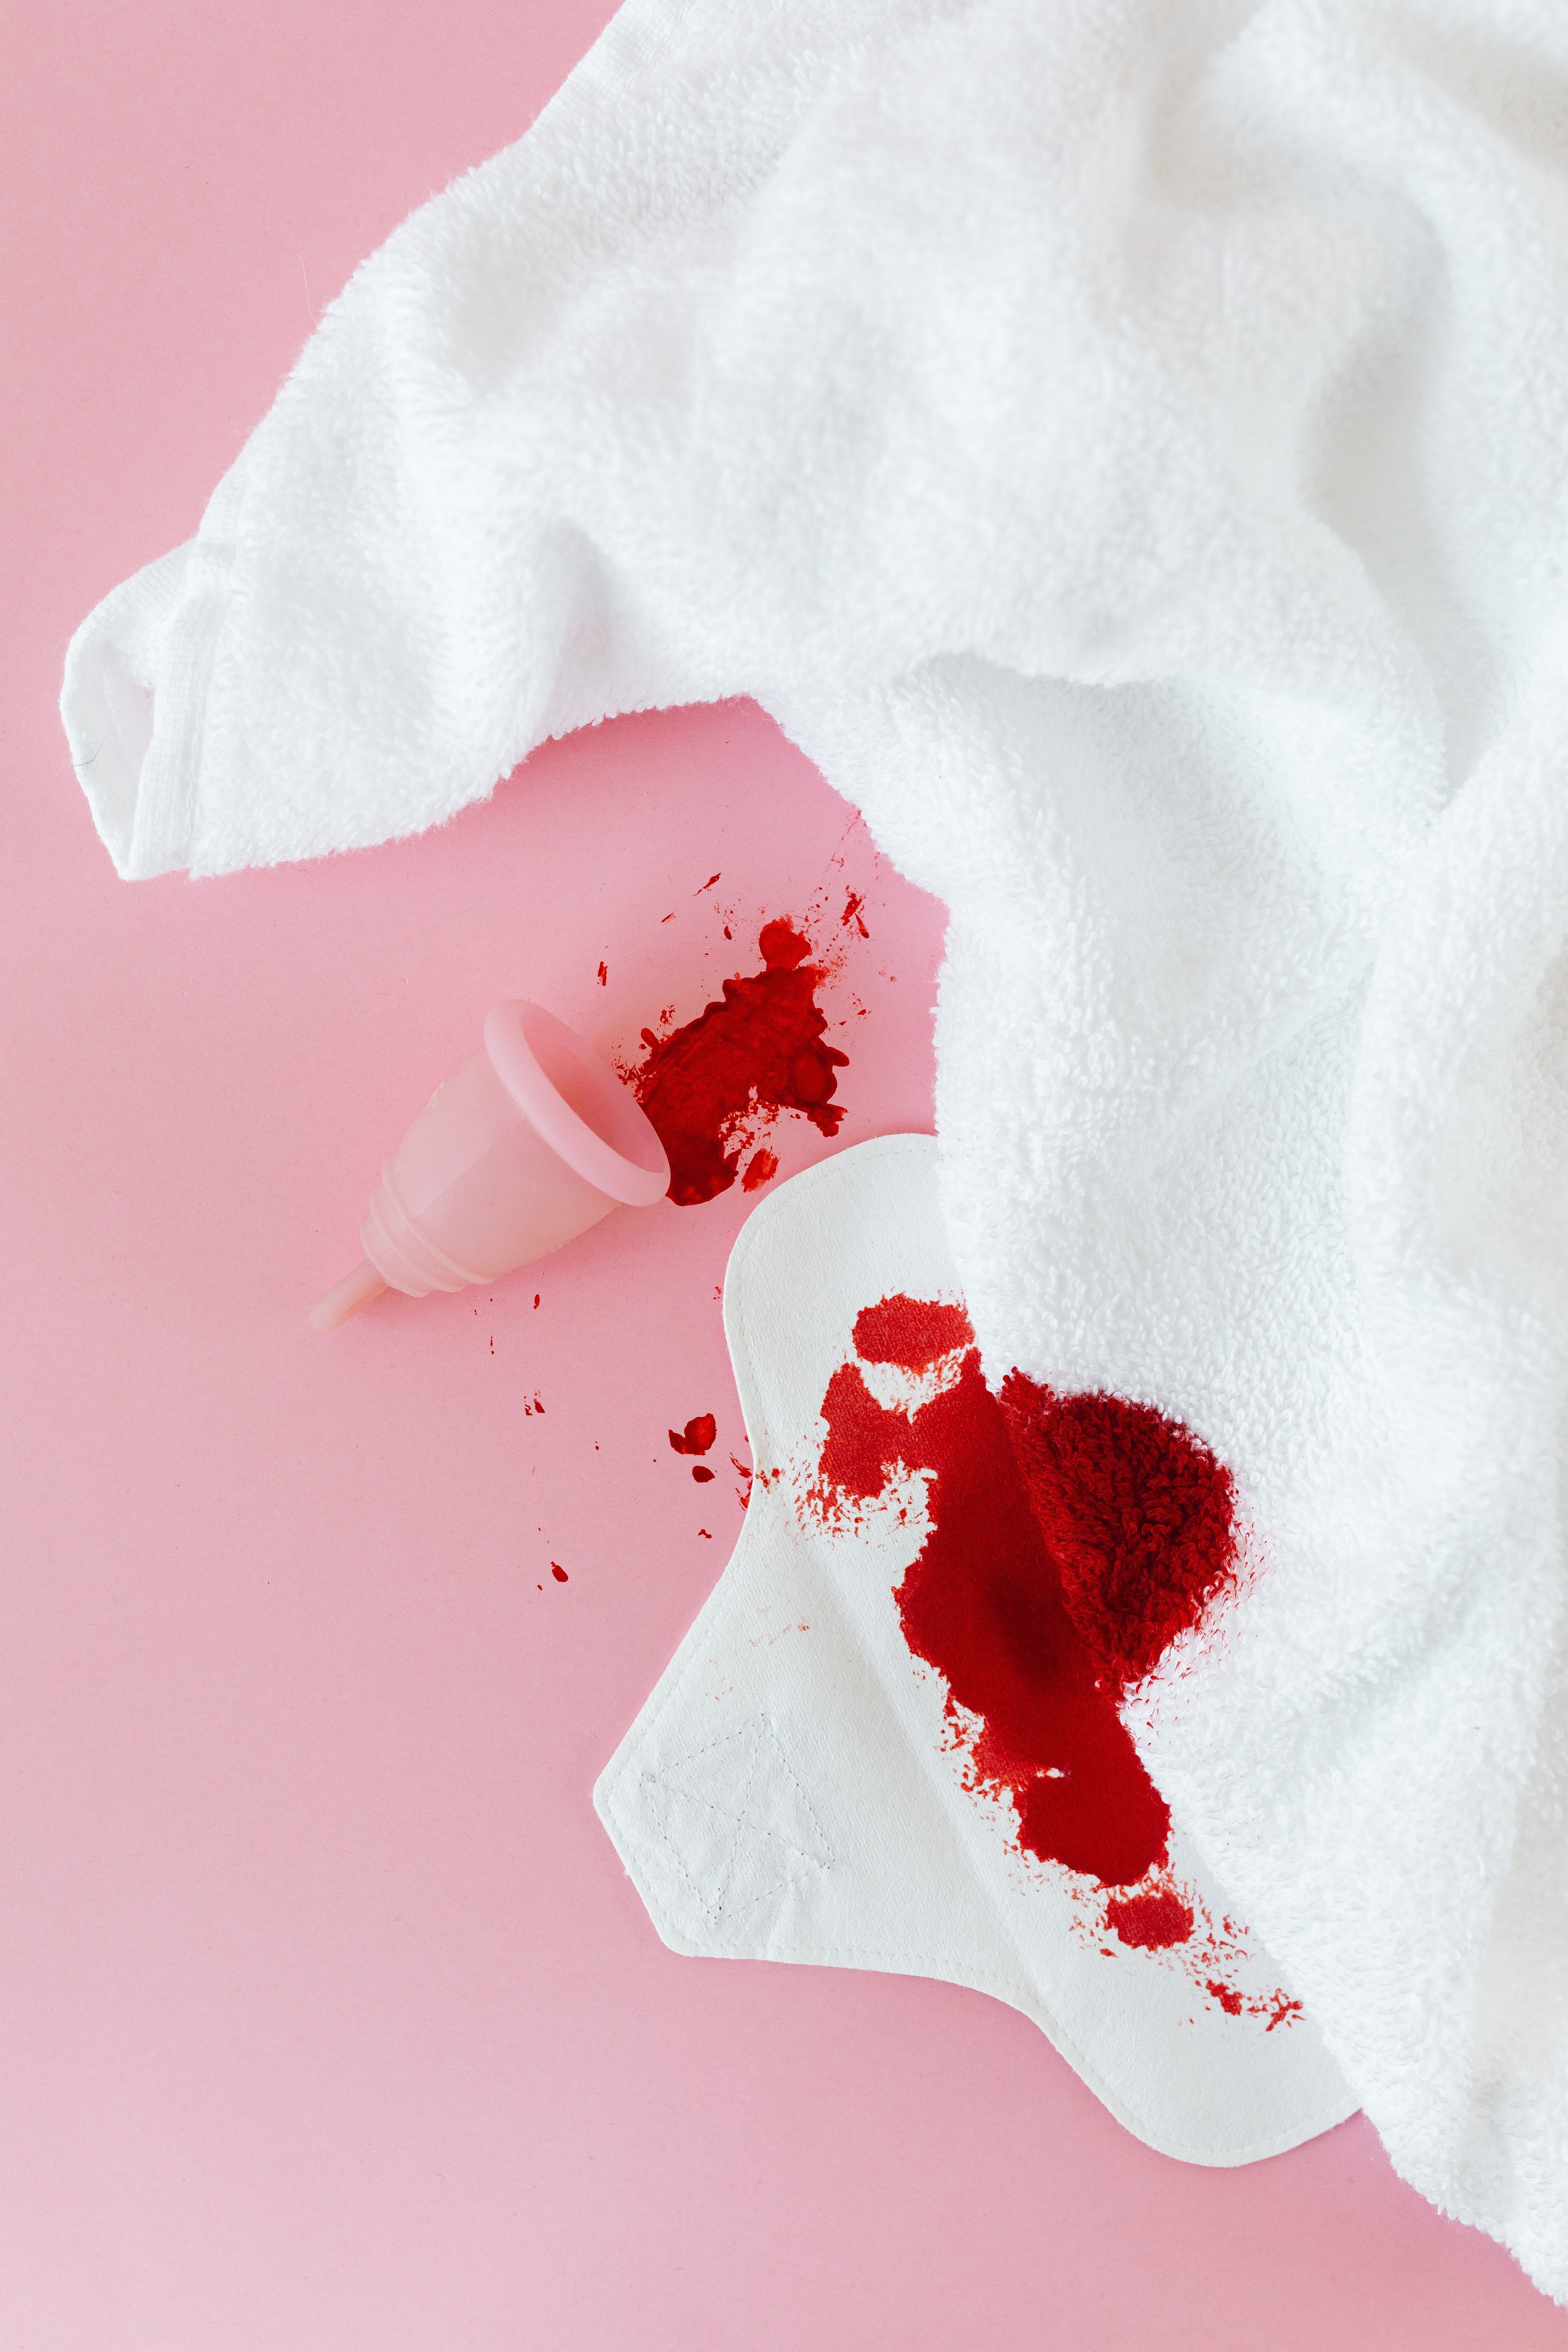 A menstrual cup is seen spilling blood onto a white towel on a pink background. - Blood